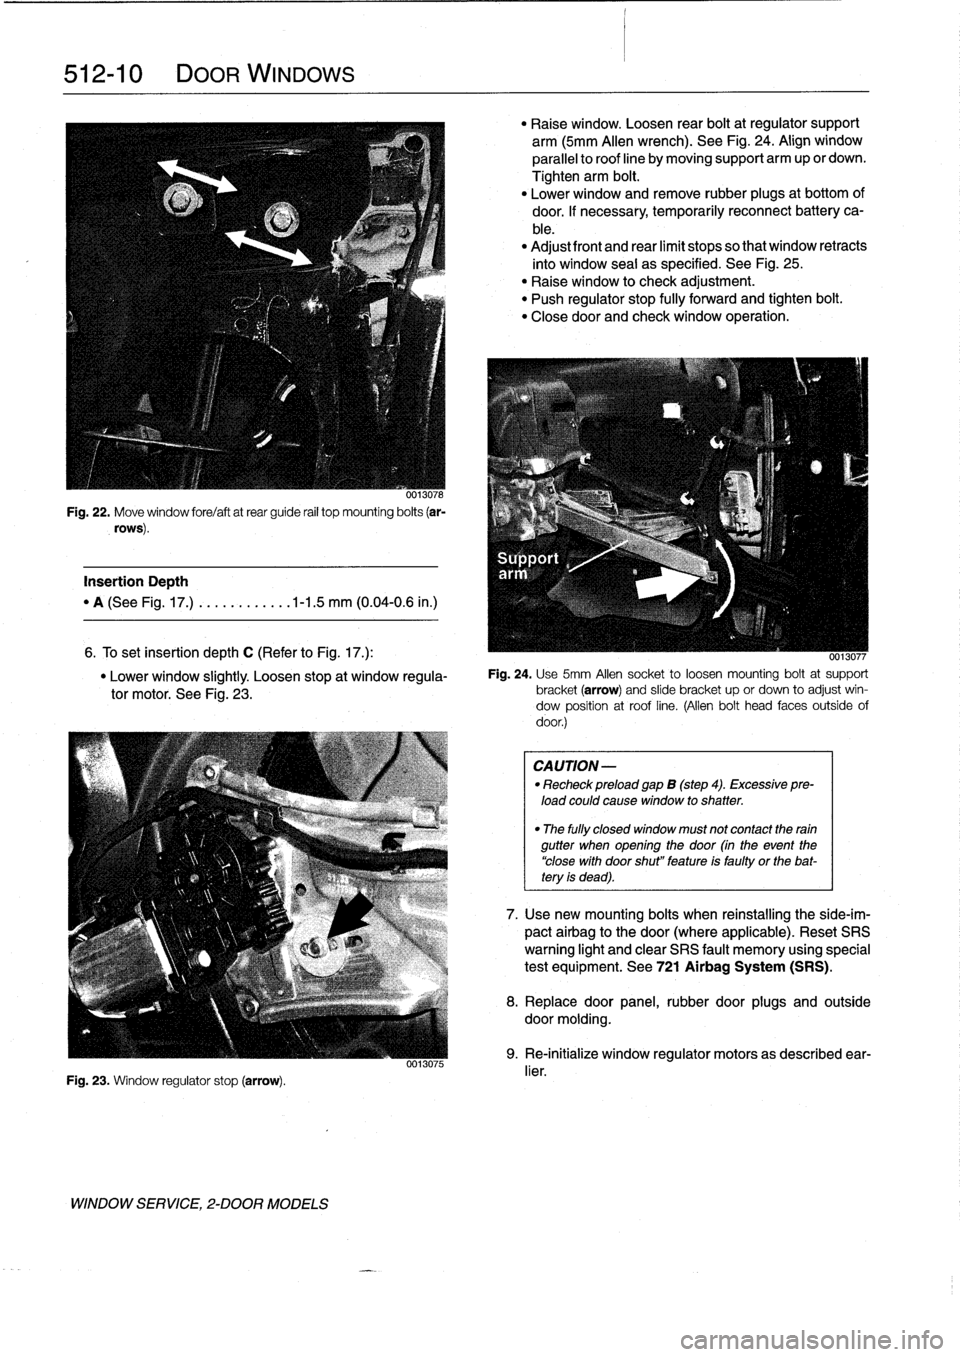 BMW 318i 1997 E36 Workshop Manual 
512-
1
0

	

DOOR
WINDOWS

0013078

Fig
.
22
.
Move
window
fore/aftatrear
guide
rail
top
mounting
bolts
(ar-

rows)
.

Insertion
Depth

"
A
(See
Fig
.
17
.)
.
..........
.1-1
.5
mm
(0
.04-0
.6
in
.)
